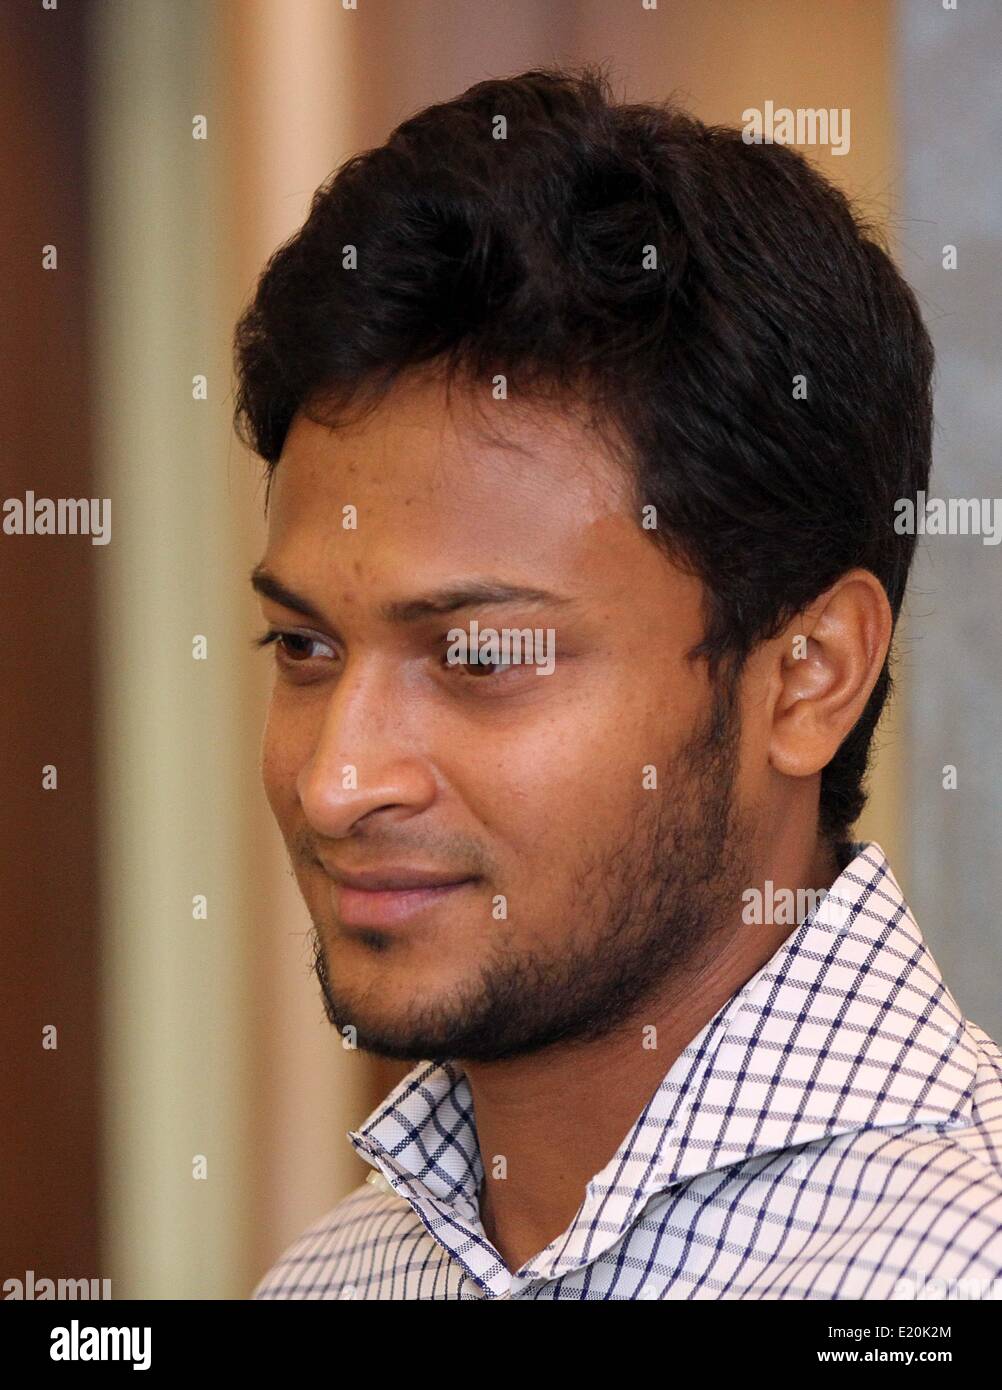 Dhaka, Bangladesh. 12 June 2014. Shakib Al Hasan is a Bangladeshi  international cricketer and statistically the most successful player in the  nation's history. He is an all-rounder batting left-handed in the middle